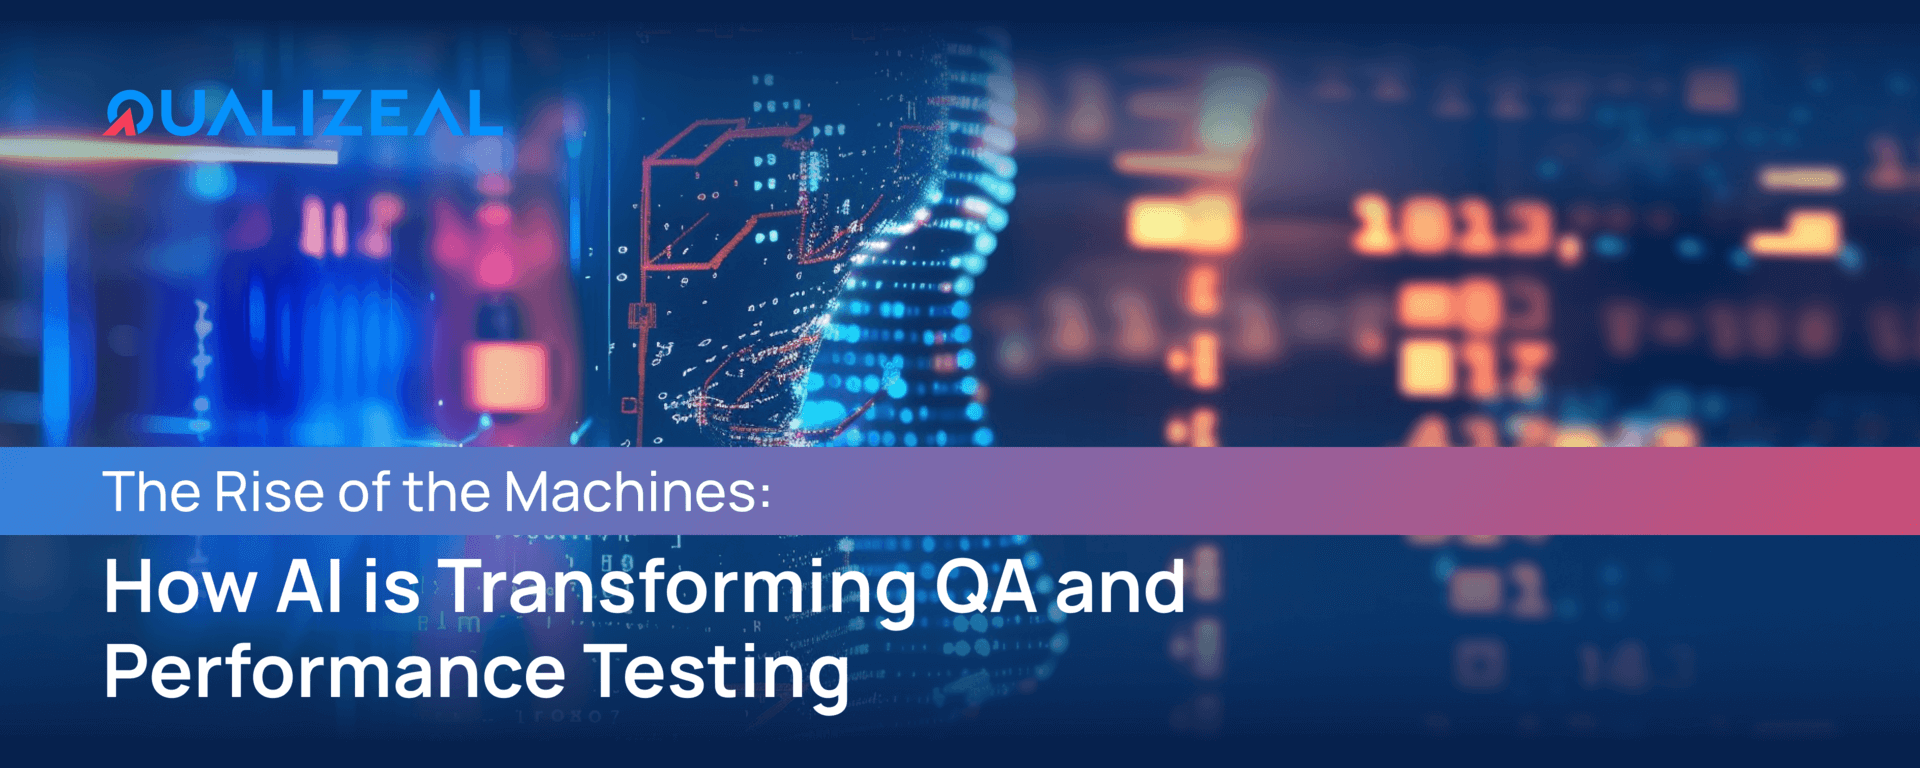 How AI Is Transforming QA And Performance Testing